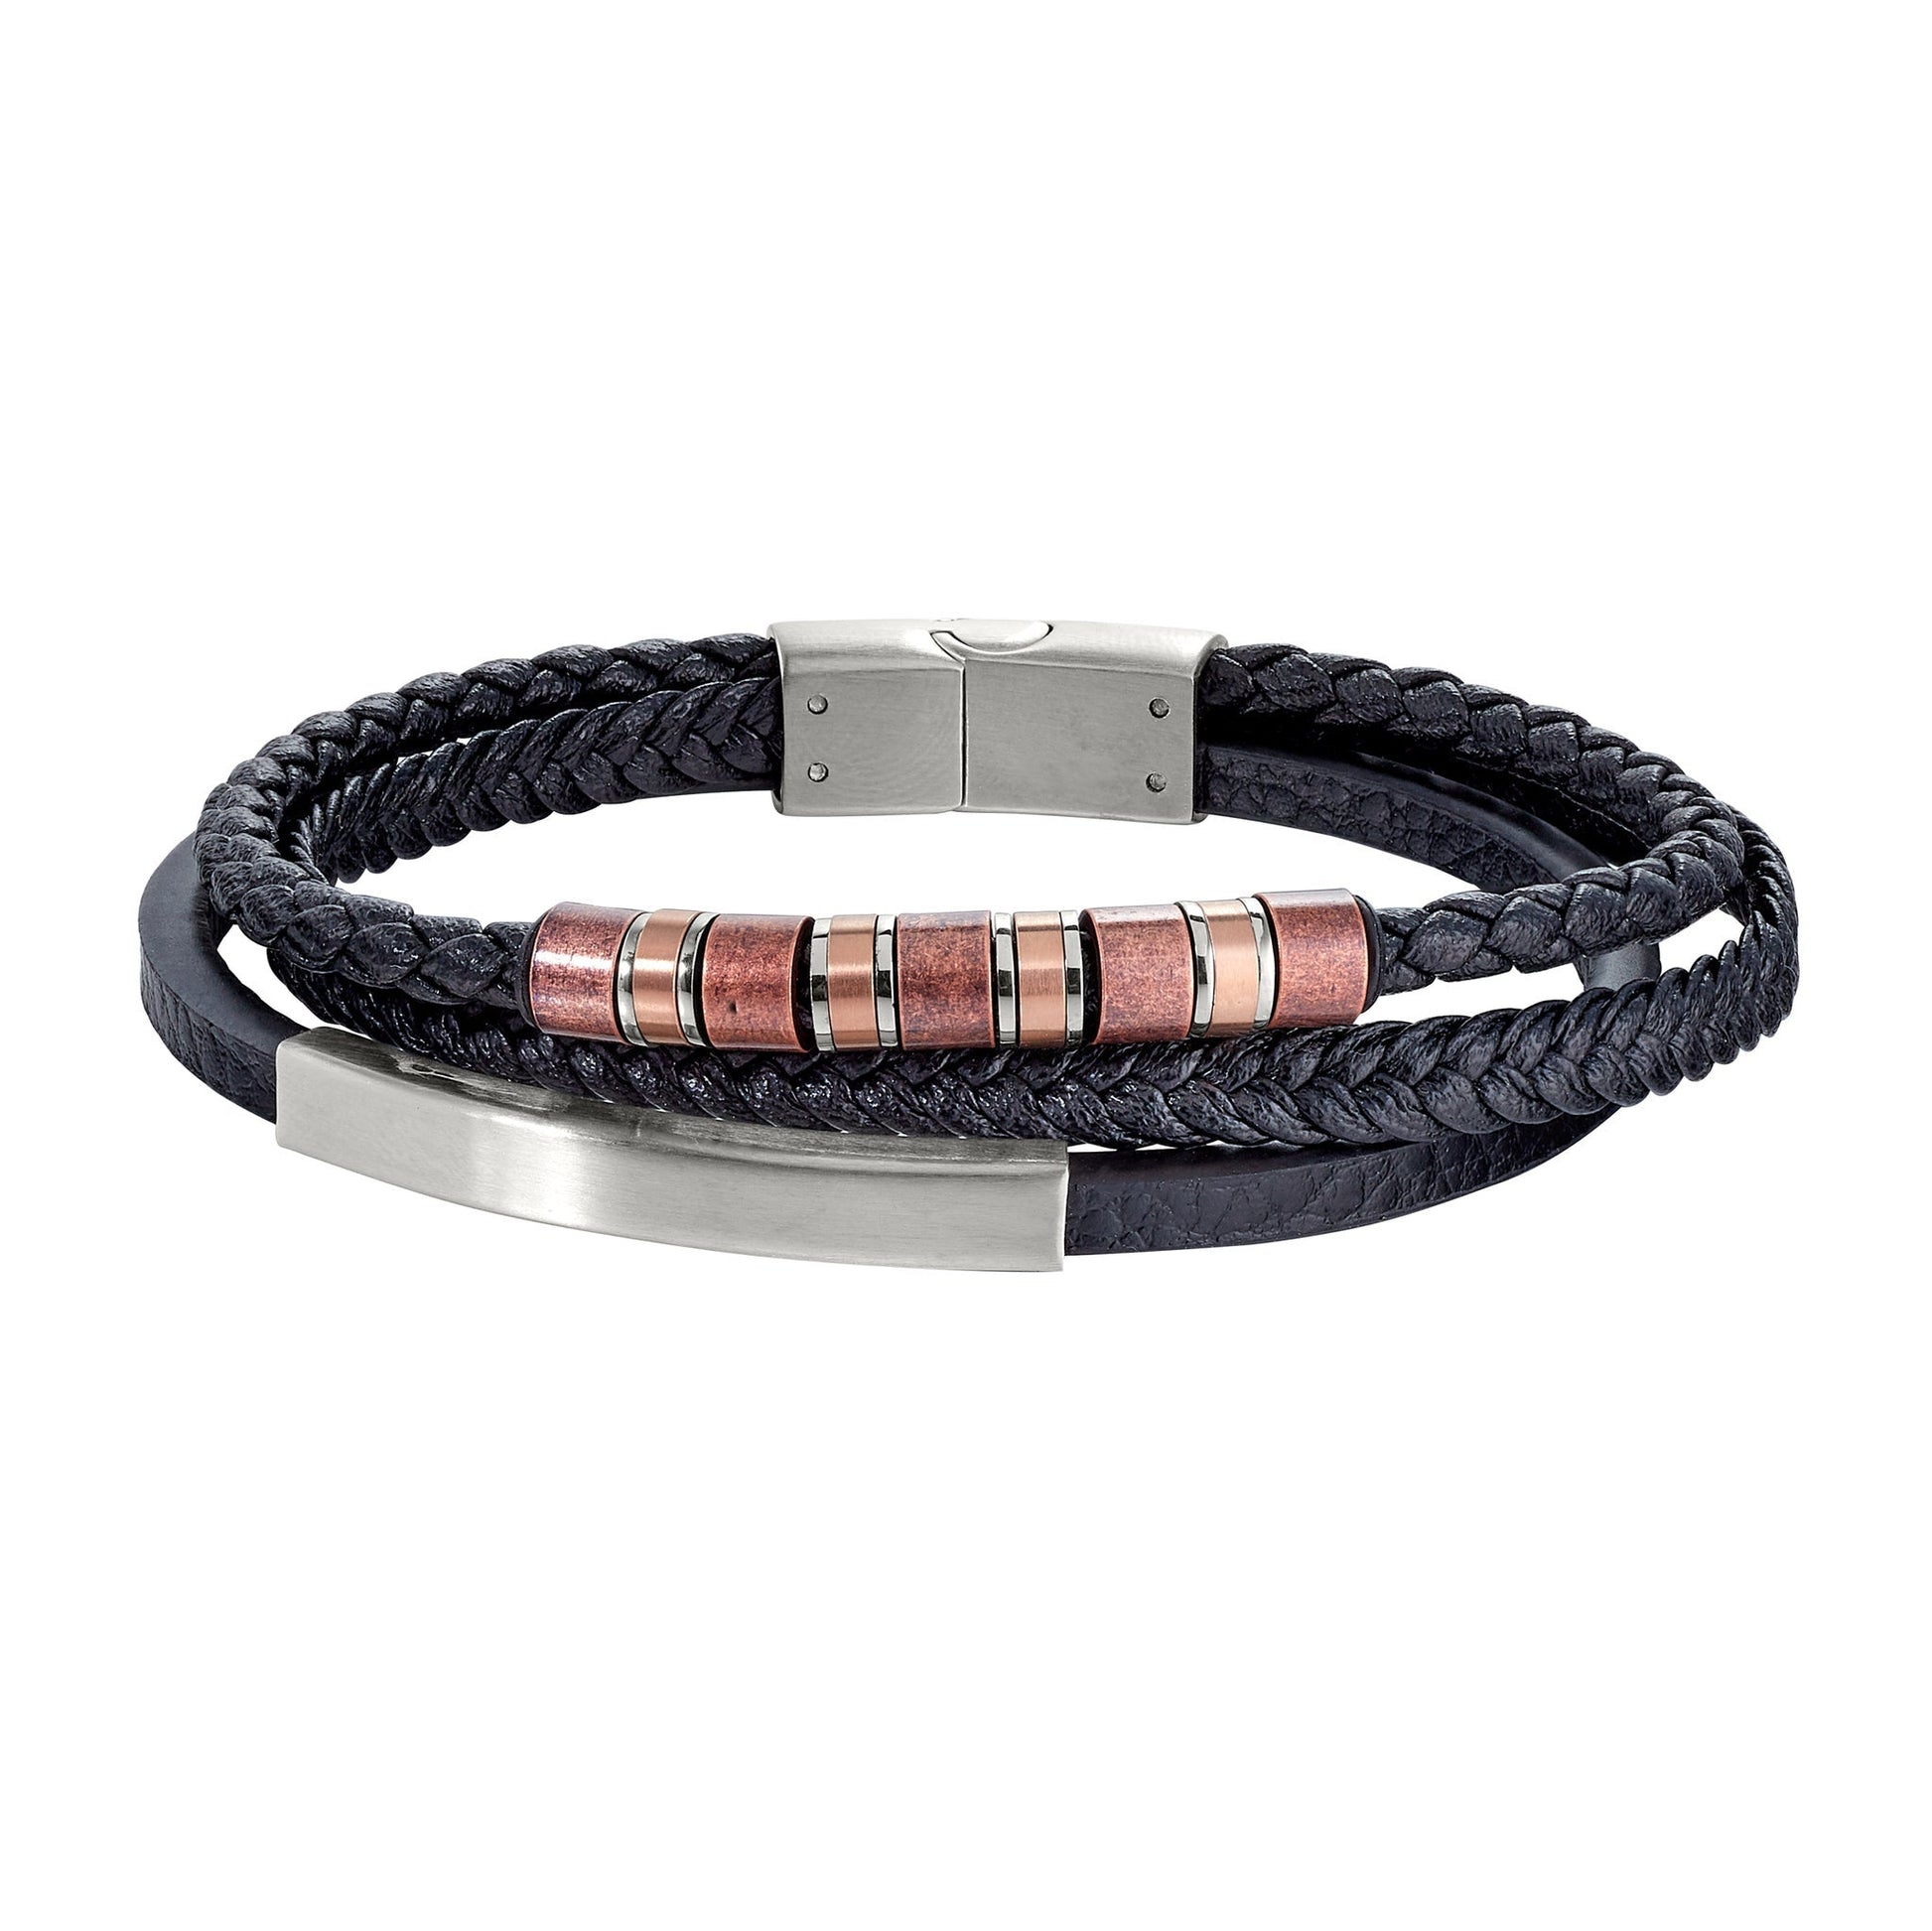 A leather 3 cord men's bracelet with stainless steel bar & spiral accents displayed on a neutral white background.